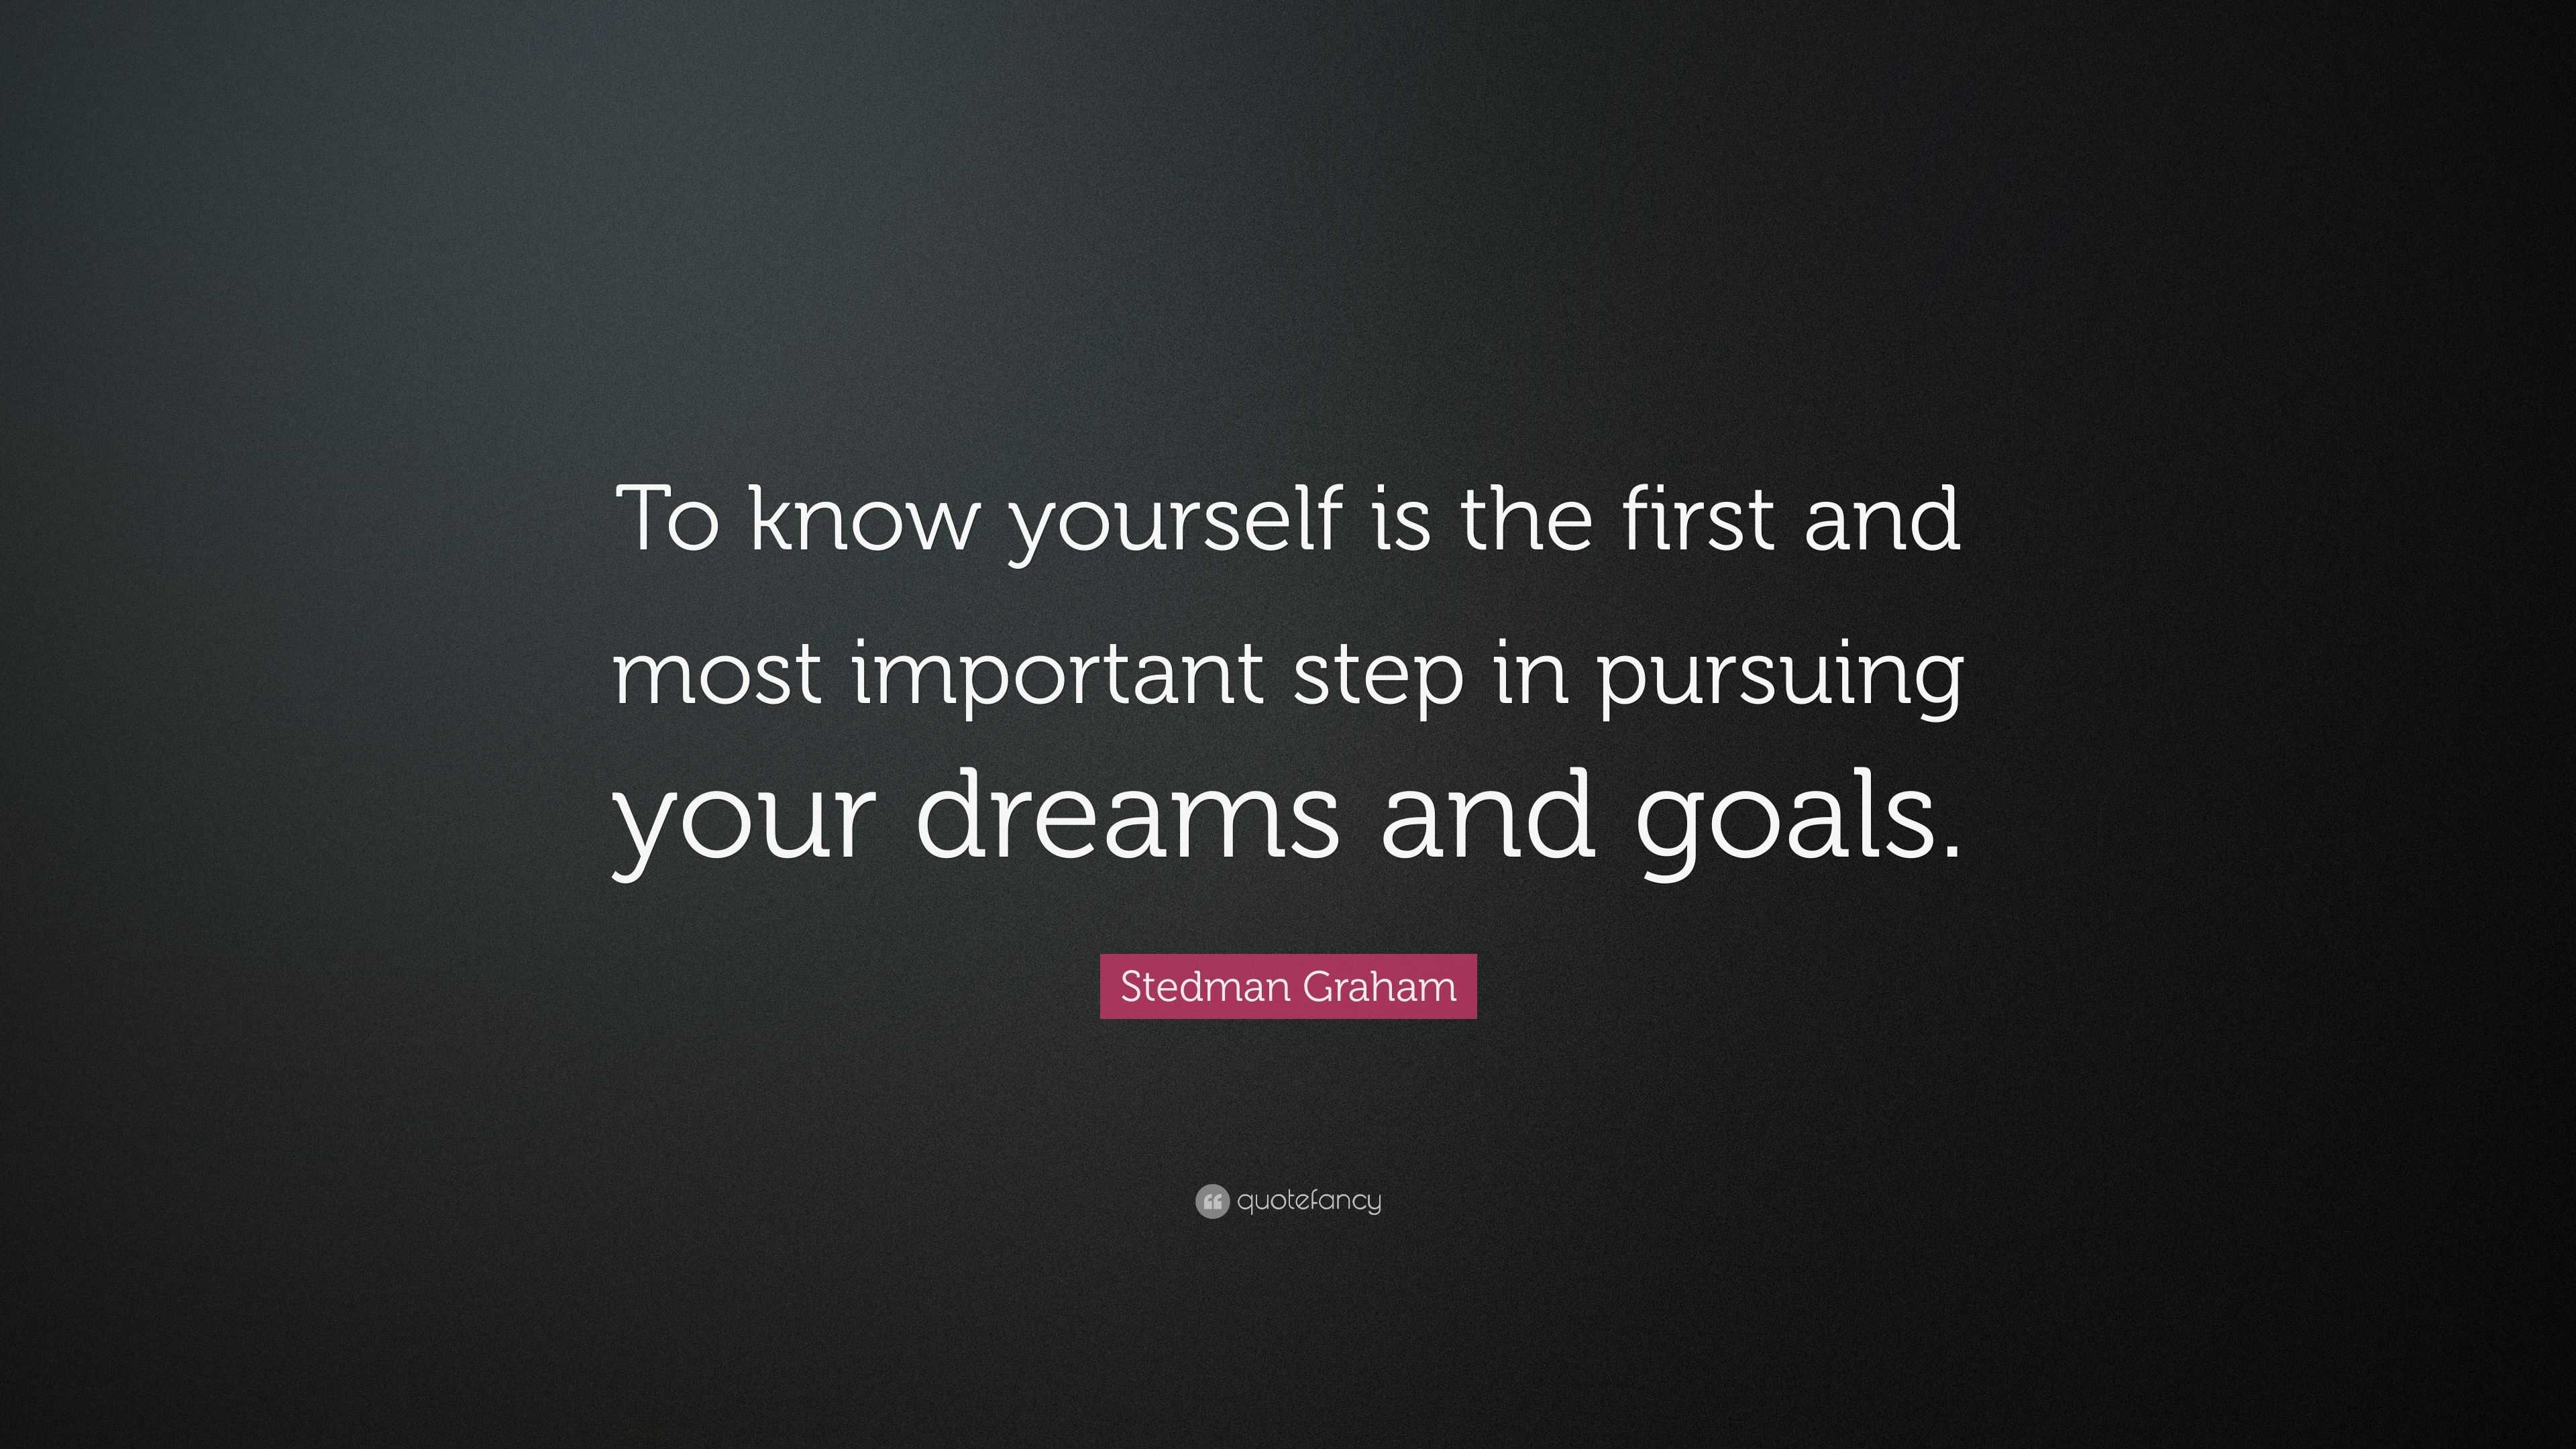 Stedman Graham Quote: “To know yourself is the first and most important ...